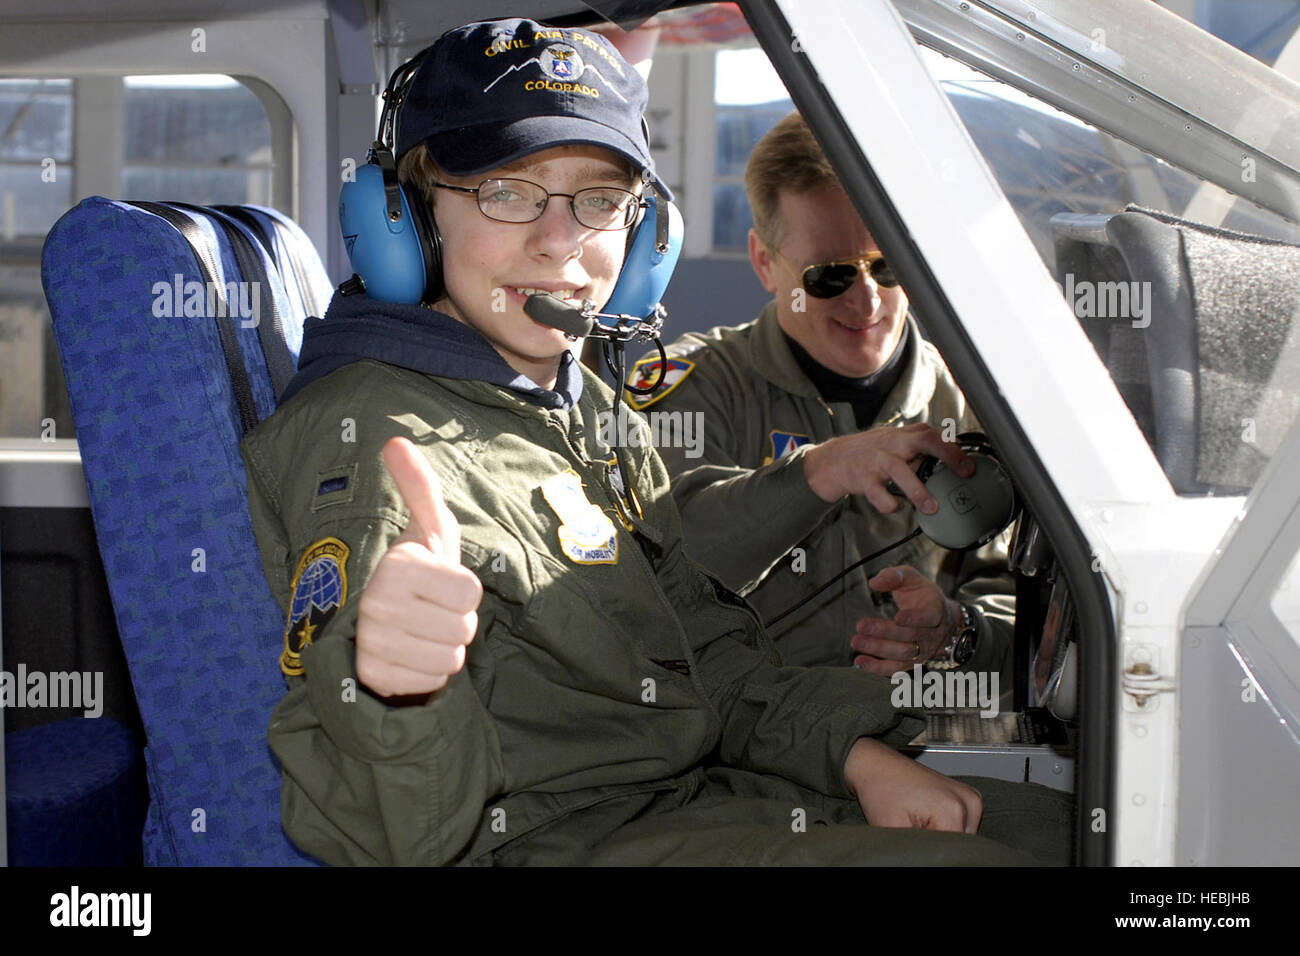 Zachery Olson gets acquainted with a Civil Air Patrol aircraft Jan. 19 at Peterson Air Force Base, Colo. Zachery is a a 14-year-old suffering from neurofibromatosis who has dreamed of becoming a pilot. While on base, Zachery got a flight in the CAP aircraft, toured a C-21 and was made an honorary pilot through the 311th Airlift Squadron and the Make-A-Wish Foundation. (U.S. Air Force photo/Larry Hulst) Stock Photo